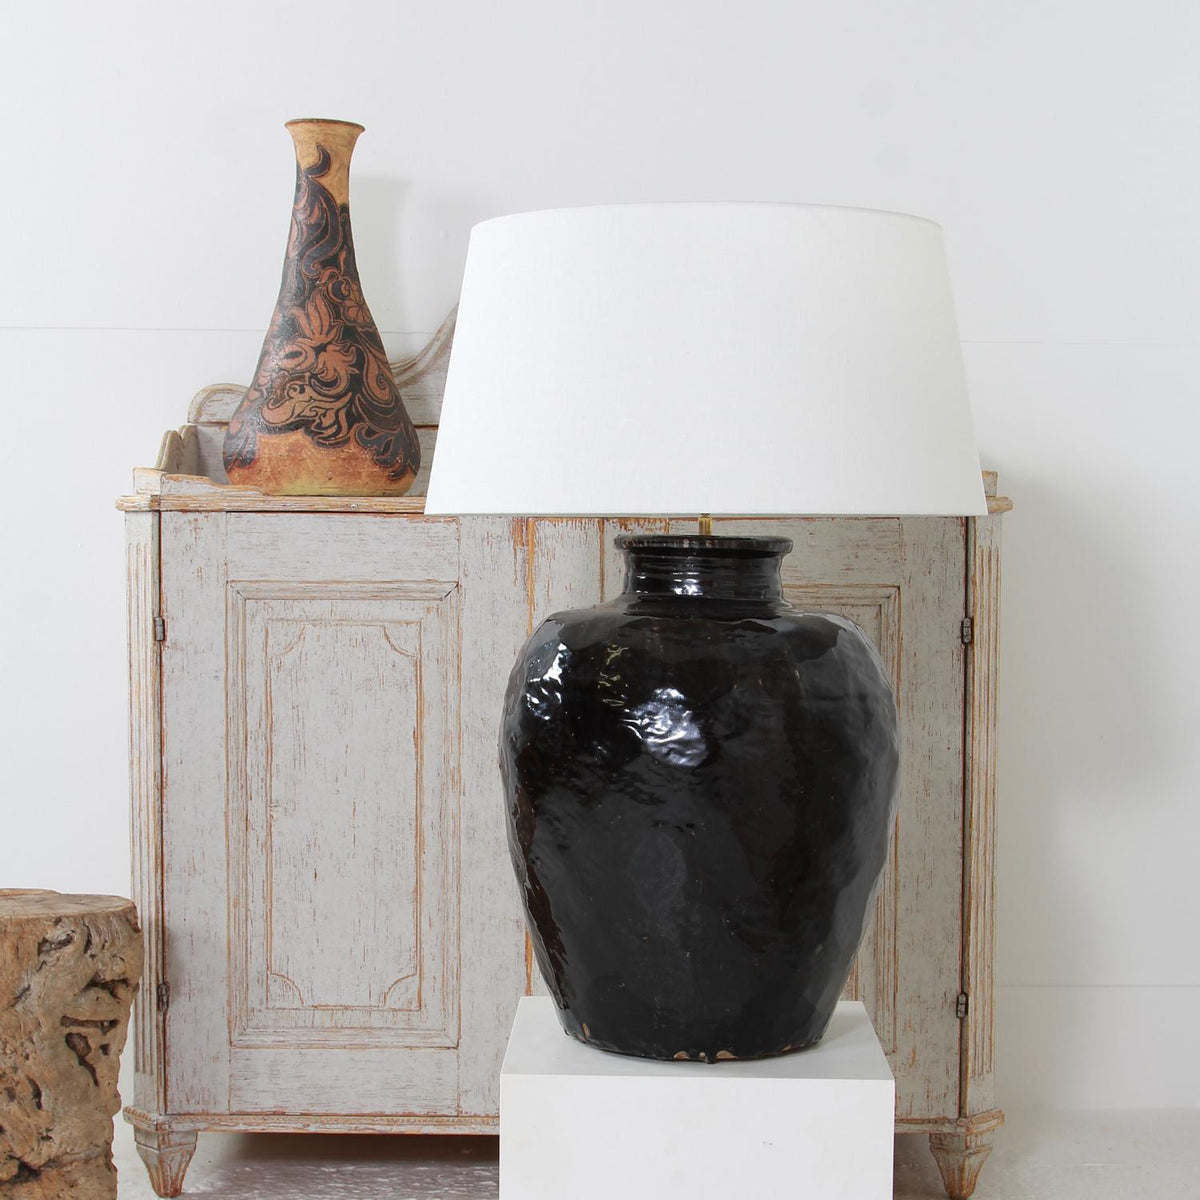 MONUMENTAL ANTIQUE BLACK GLAZED POTTERY LAMP WITH WHITE DRUM LINEN SHADE